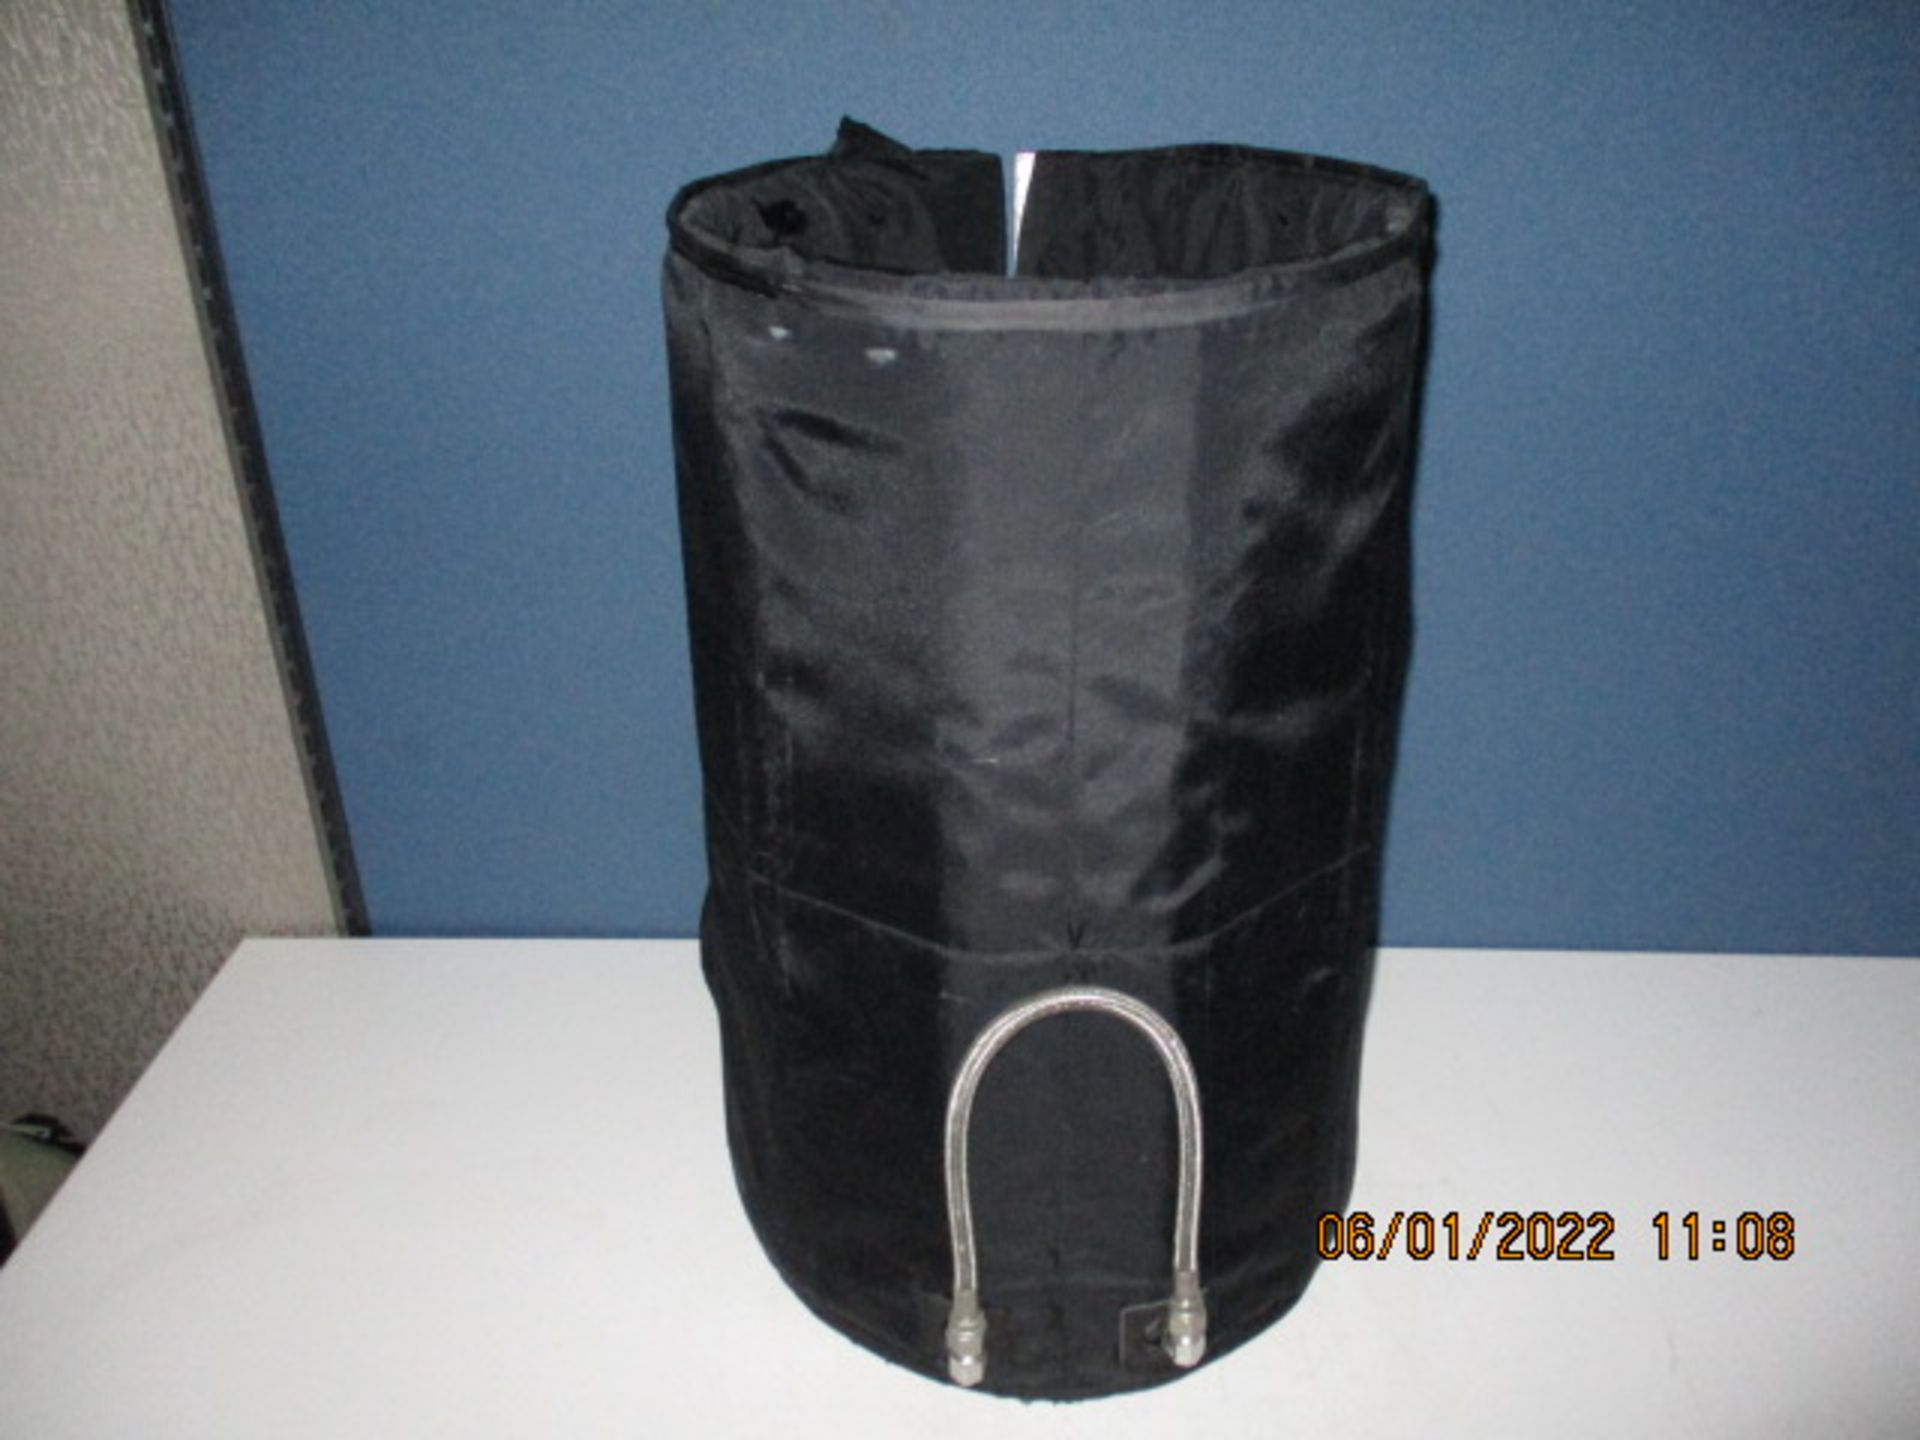 ACCURATE GAS CONTROL SYSTEMS INC TANK JACKET TALL - Image 3 of 3